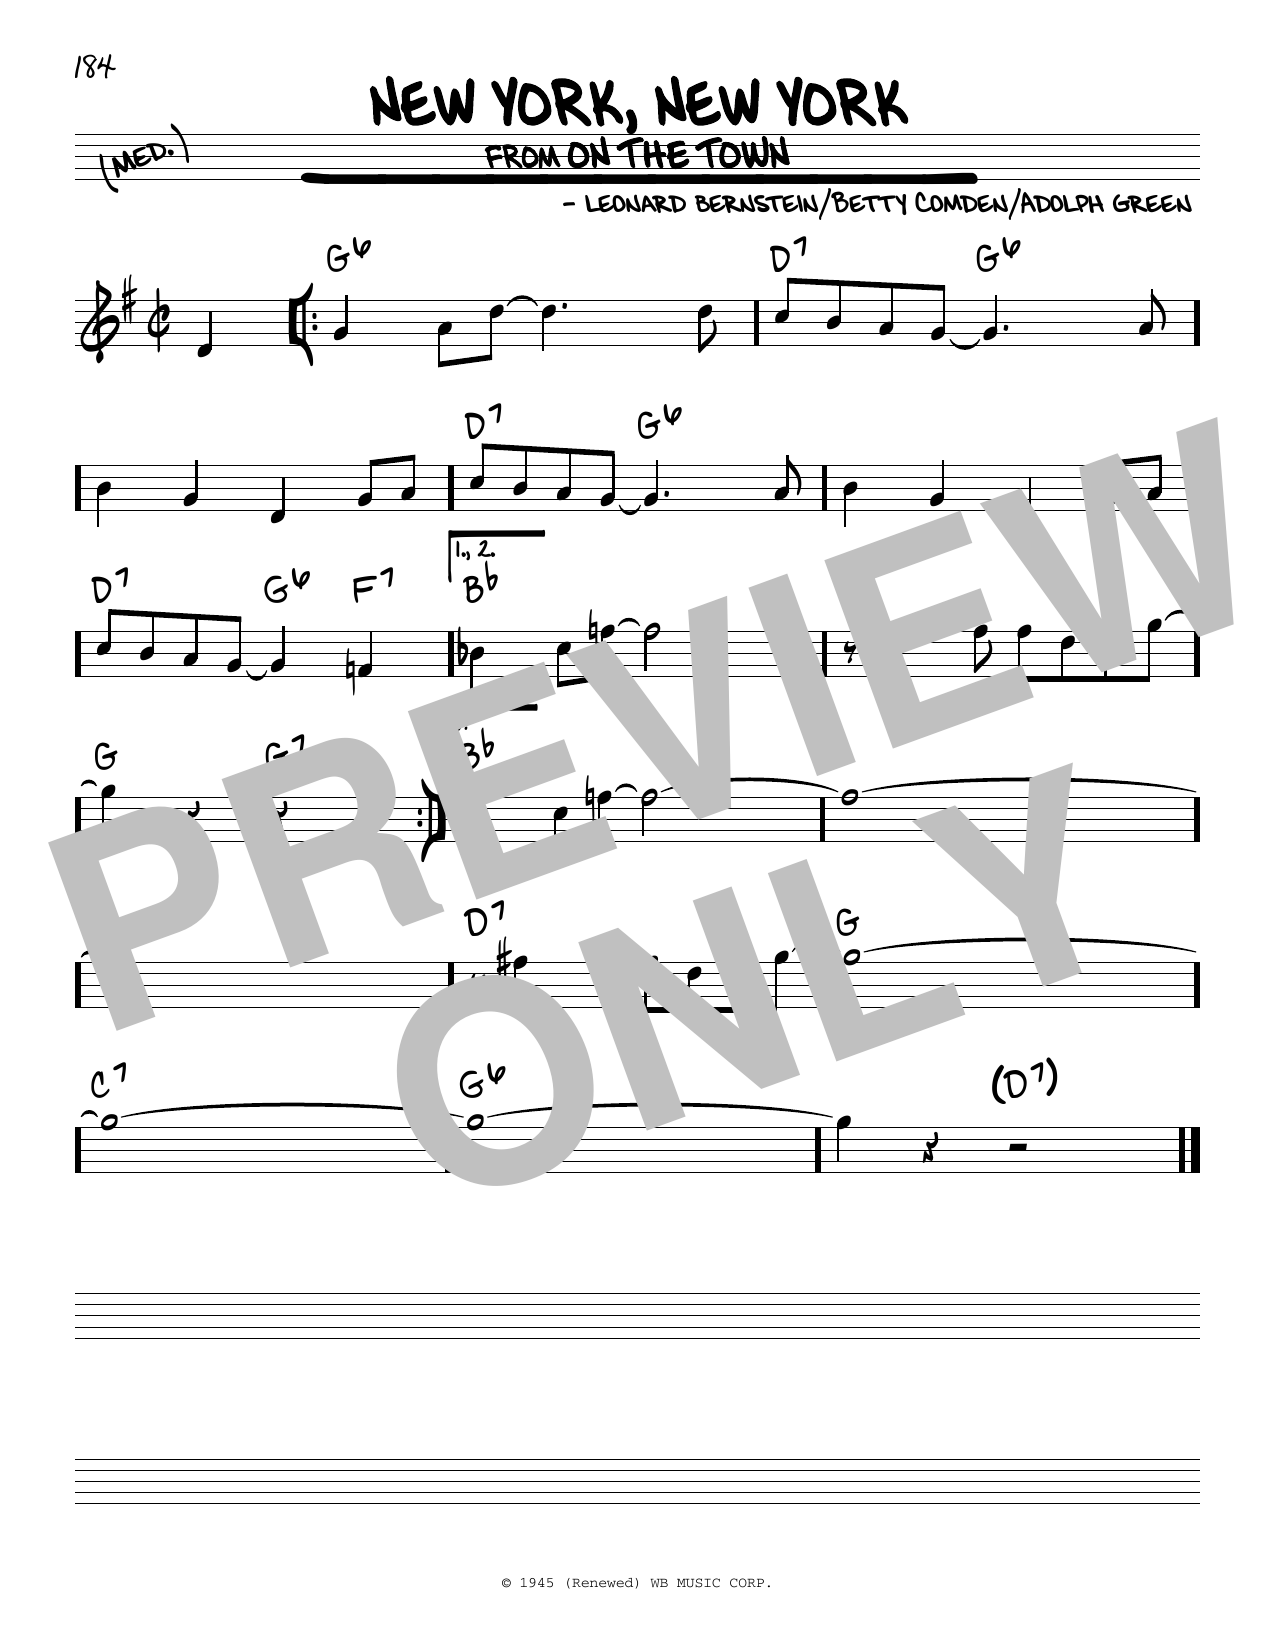 Download Adolph Green New York, New York (from On the Town) Sheet Music